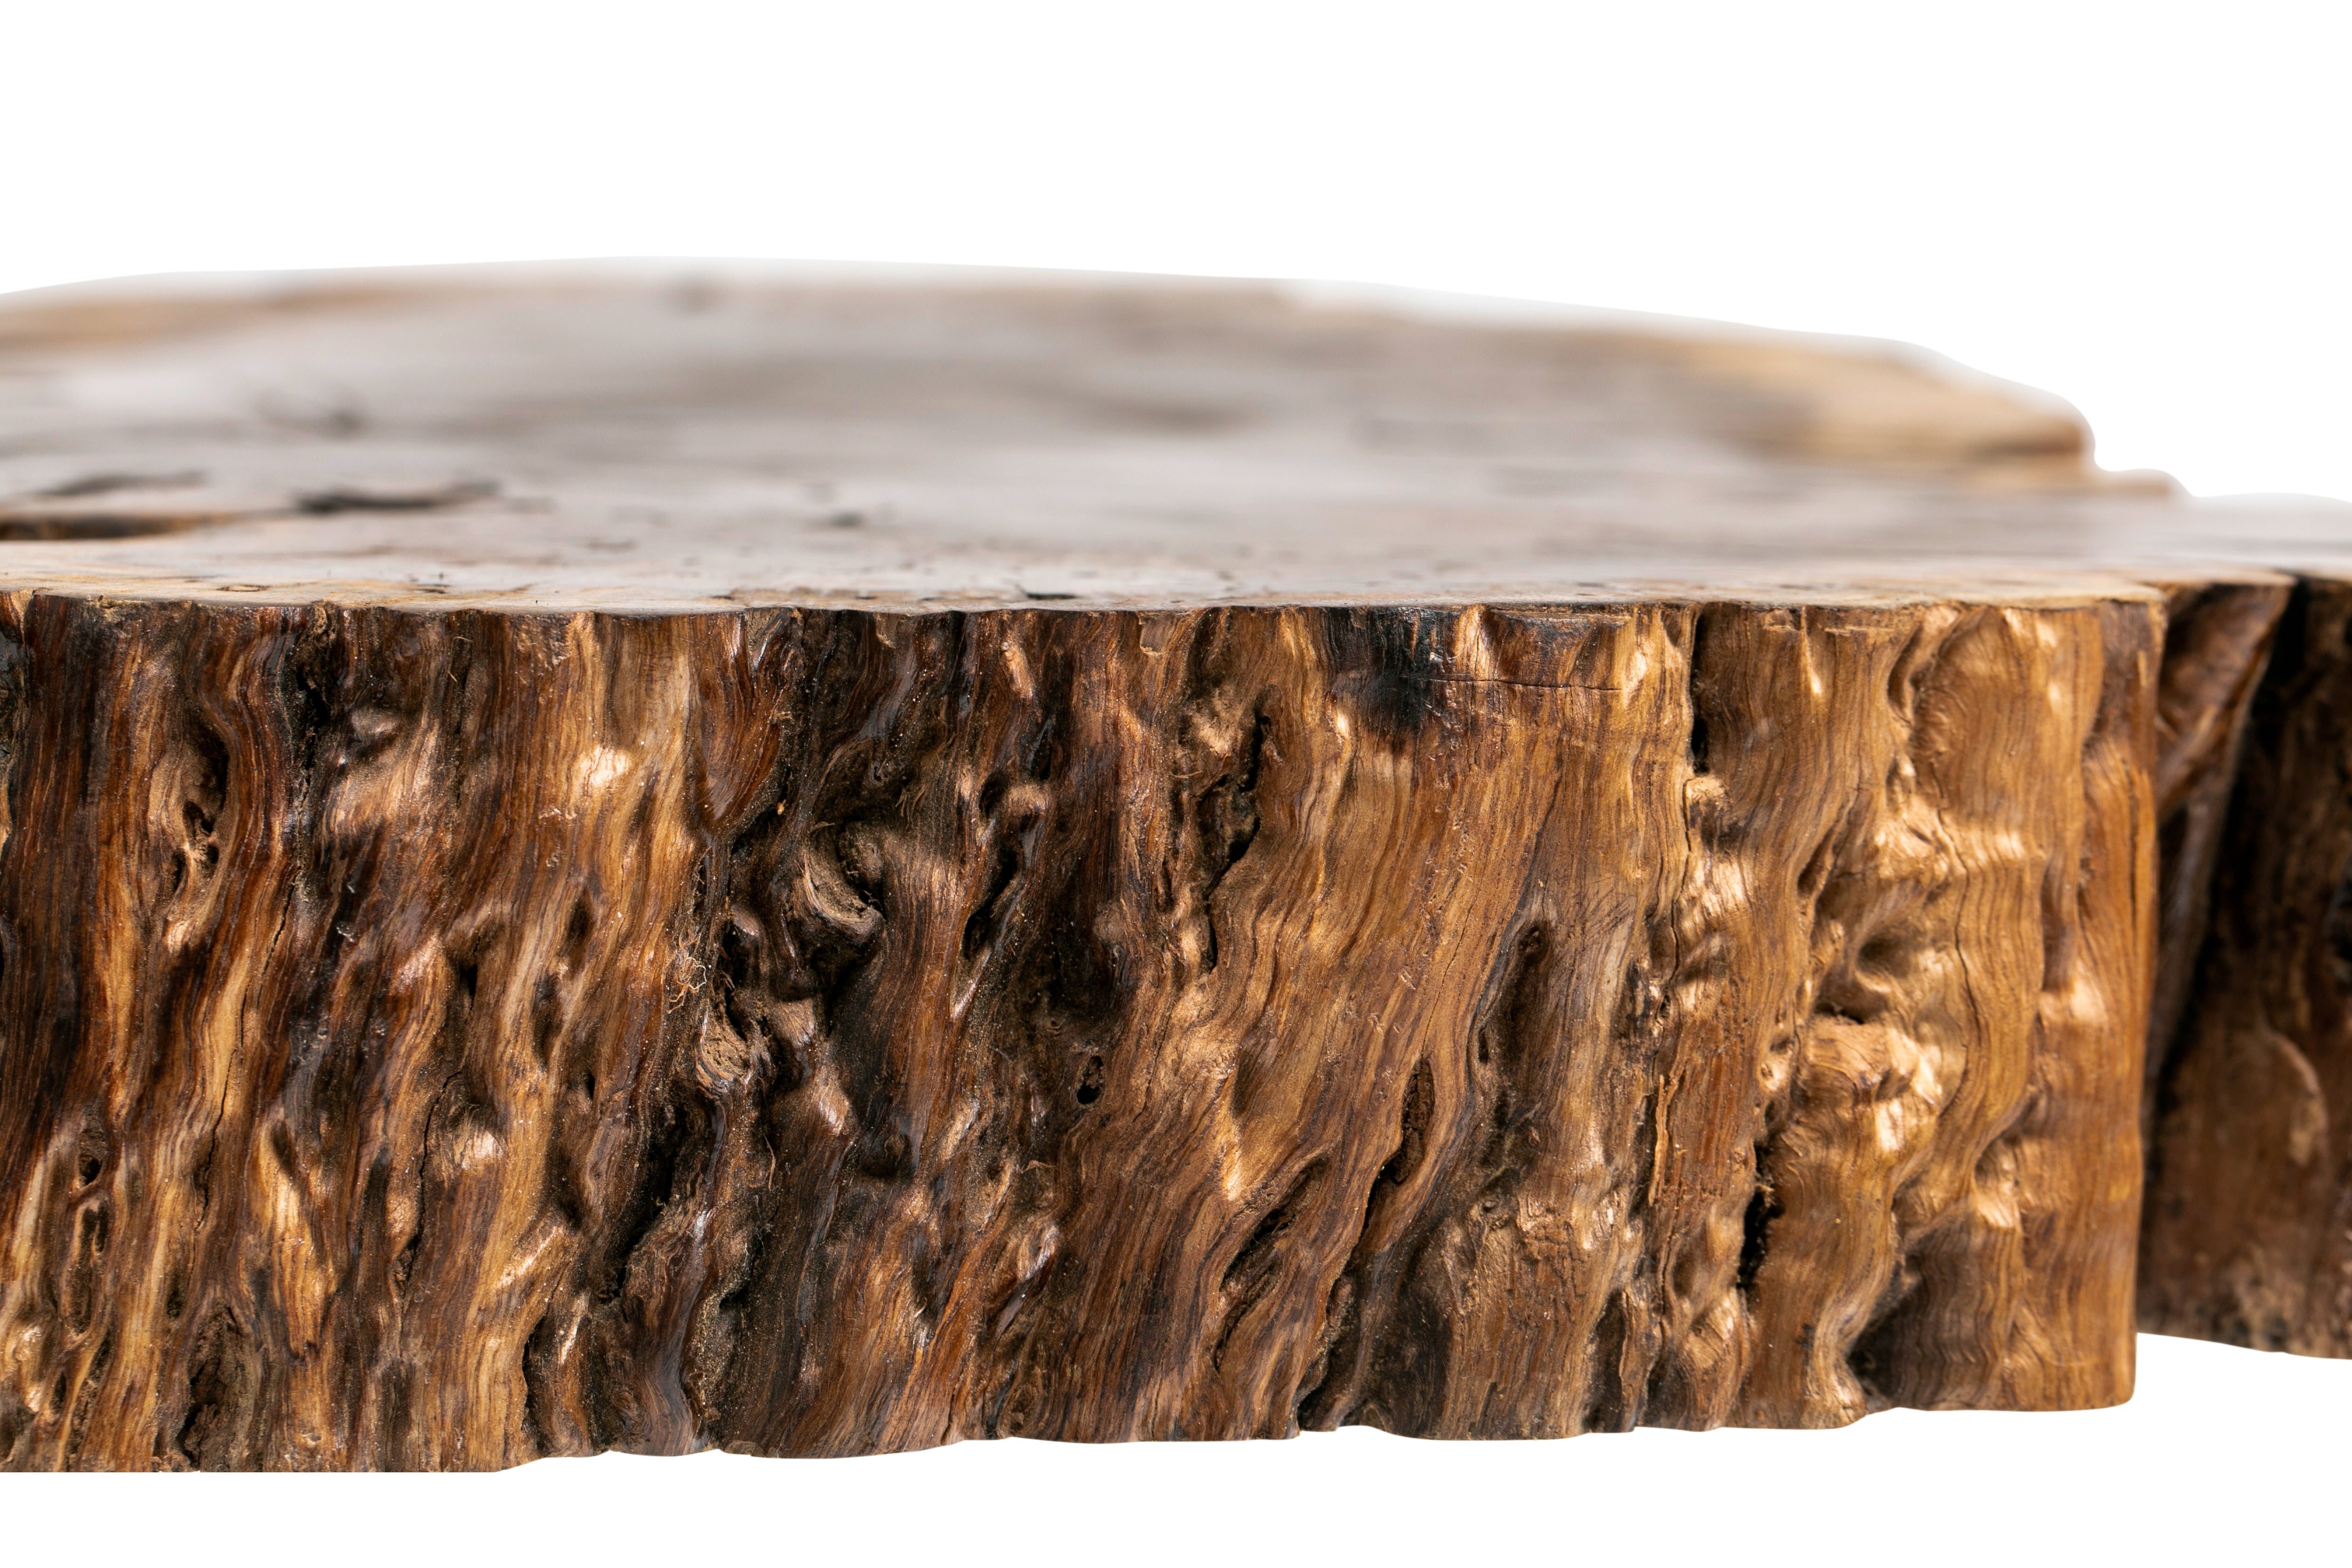 Live Edge Wood Coffee Table - Mid Century Modern - Handcrafted Furniture